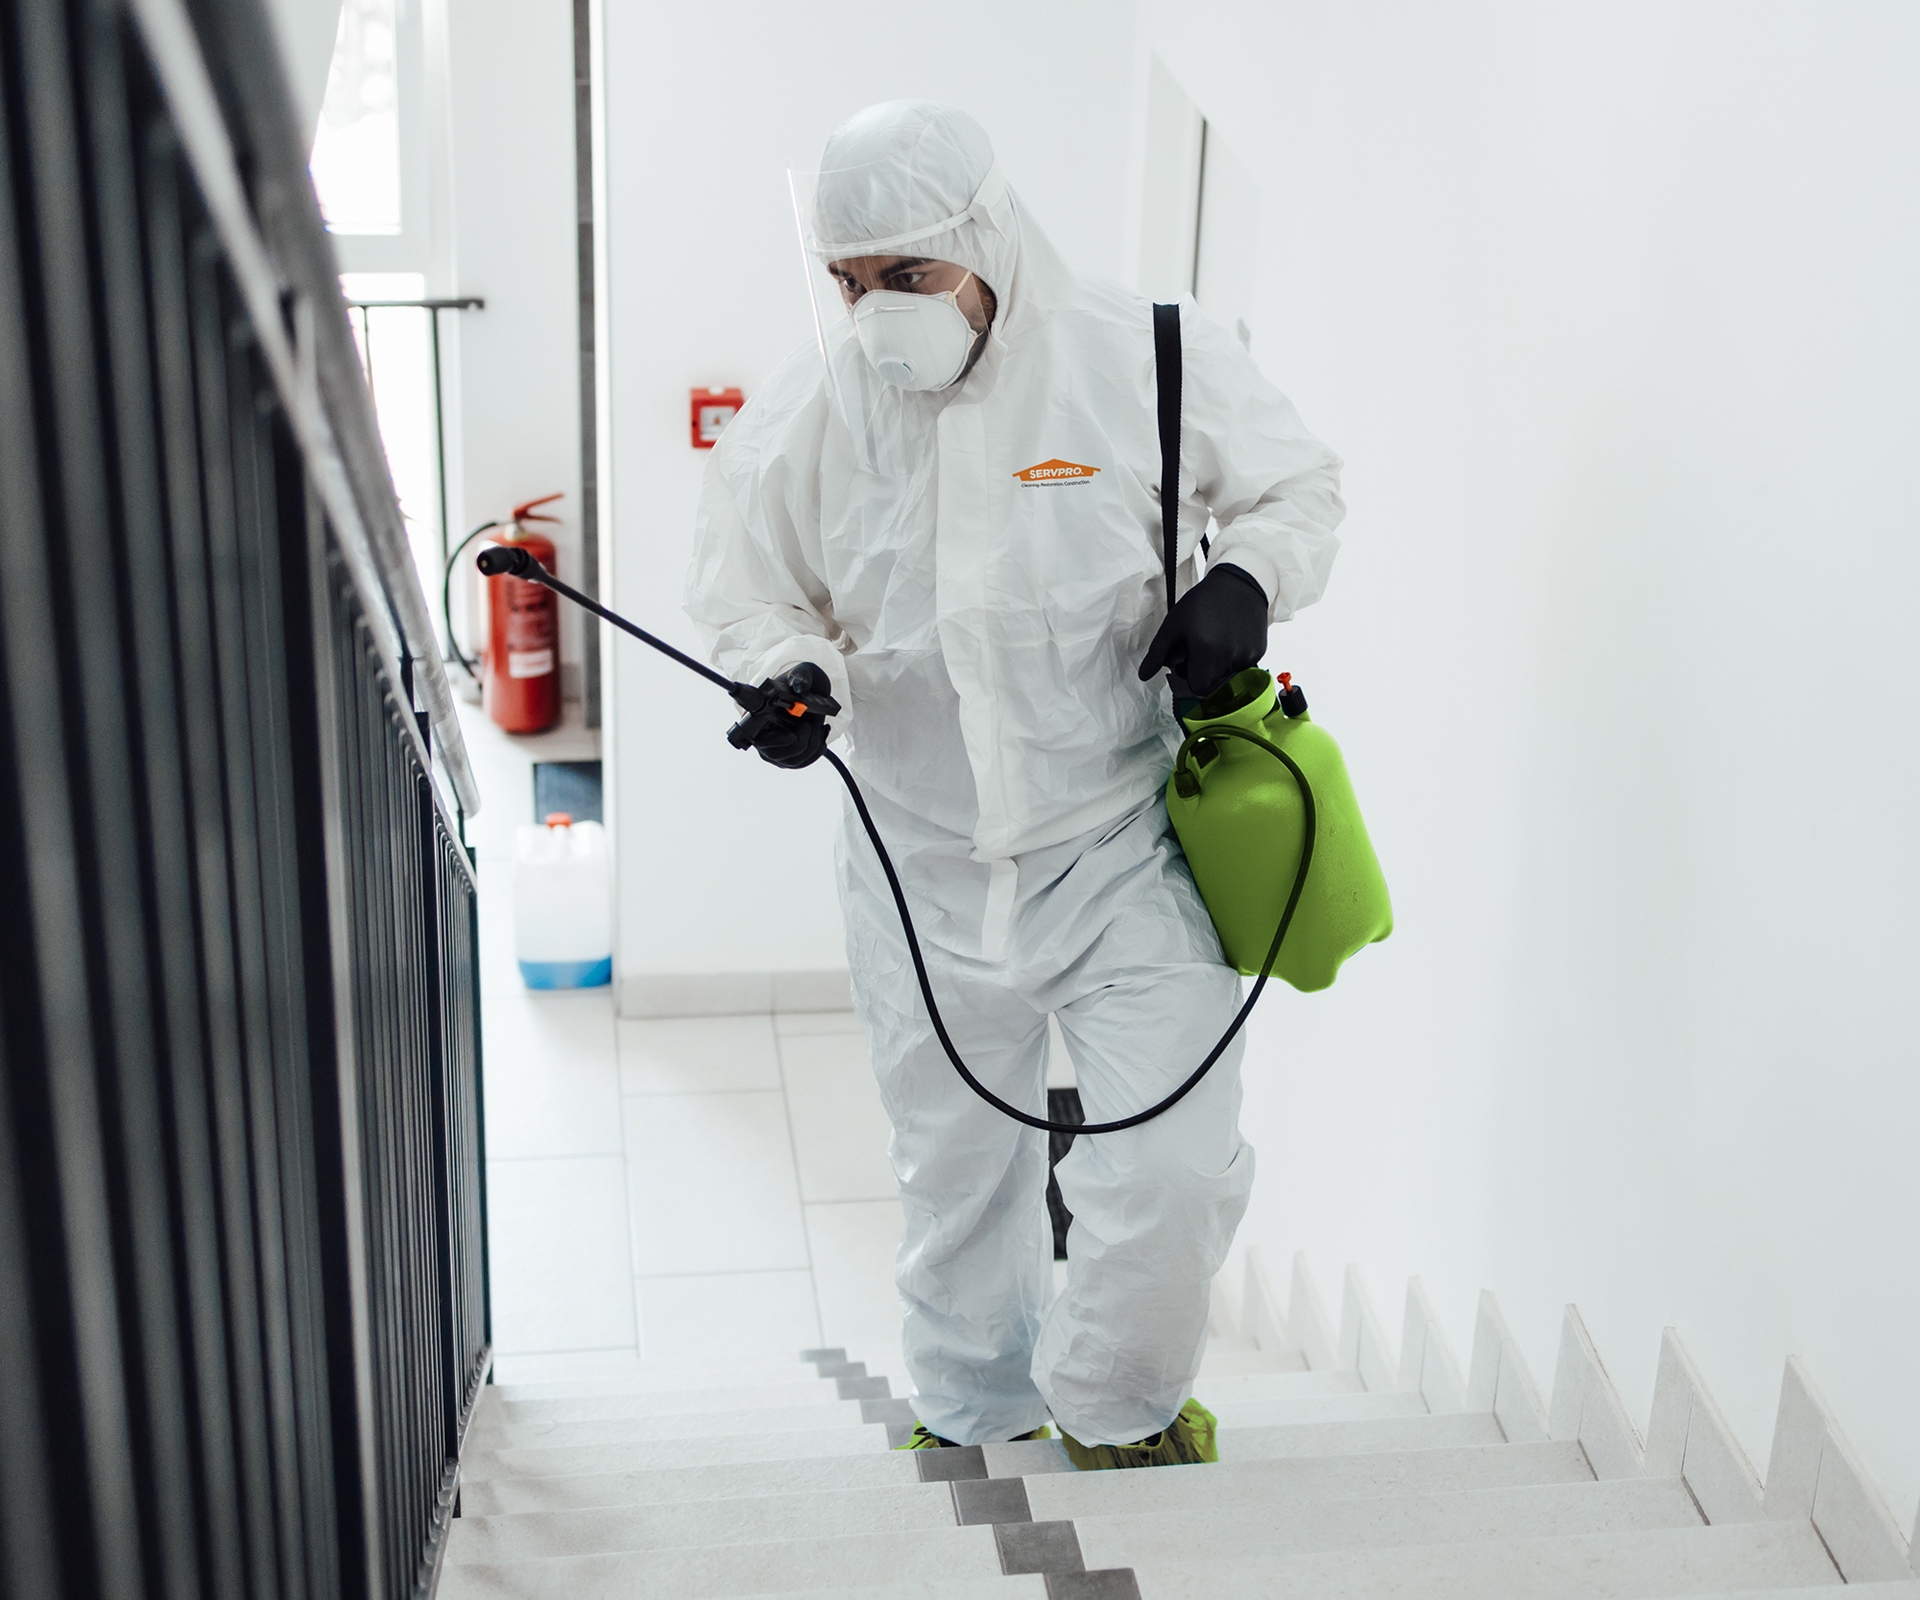 Worker in hazmat suit cleaning commercial space